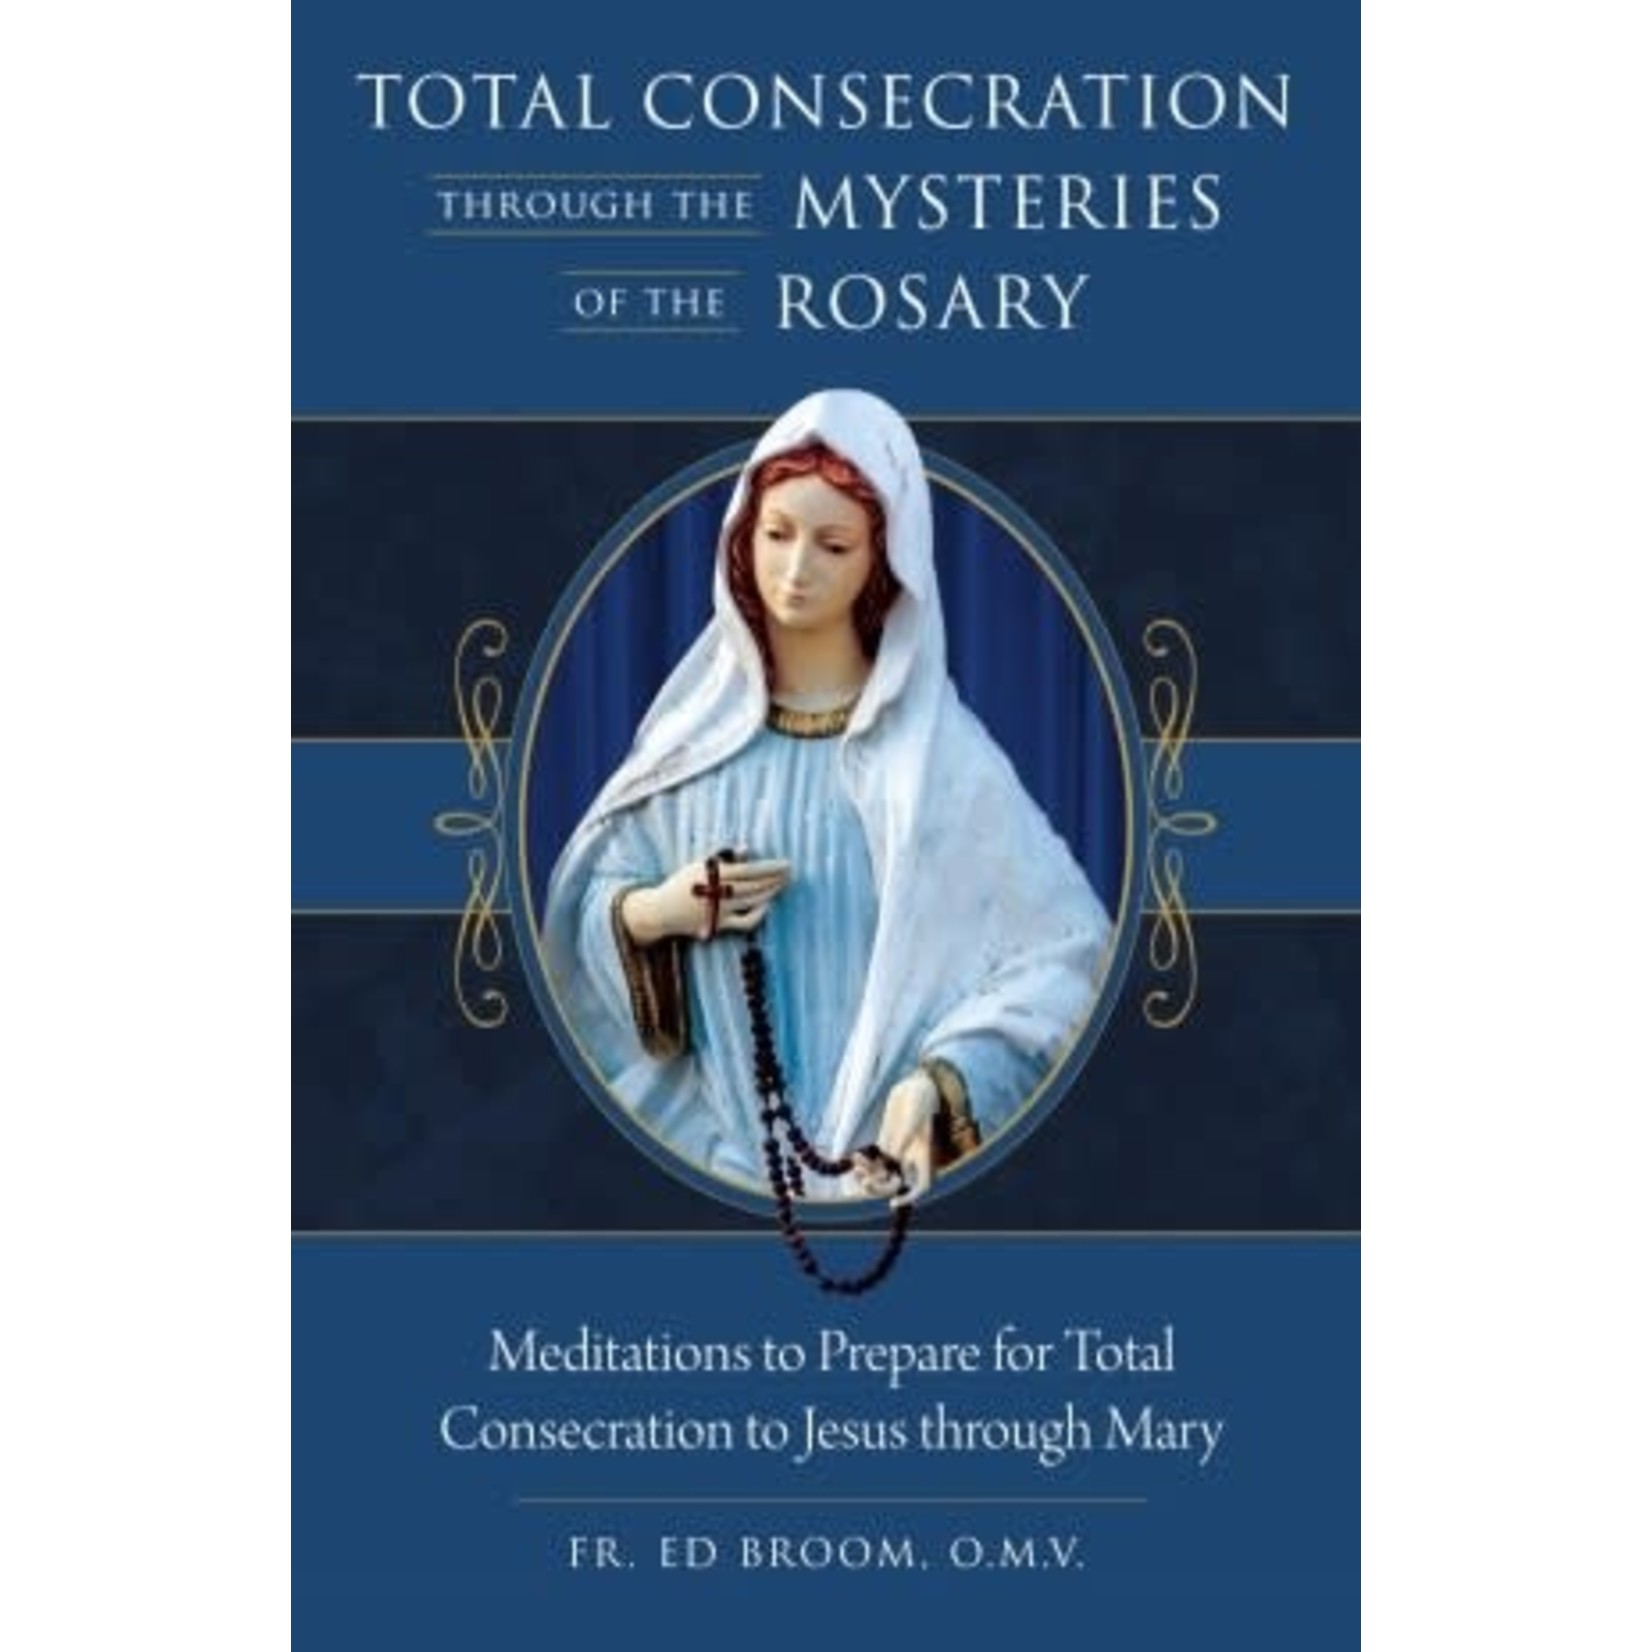 Total Consecration through the Mysteries of the Rosary